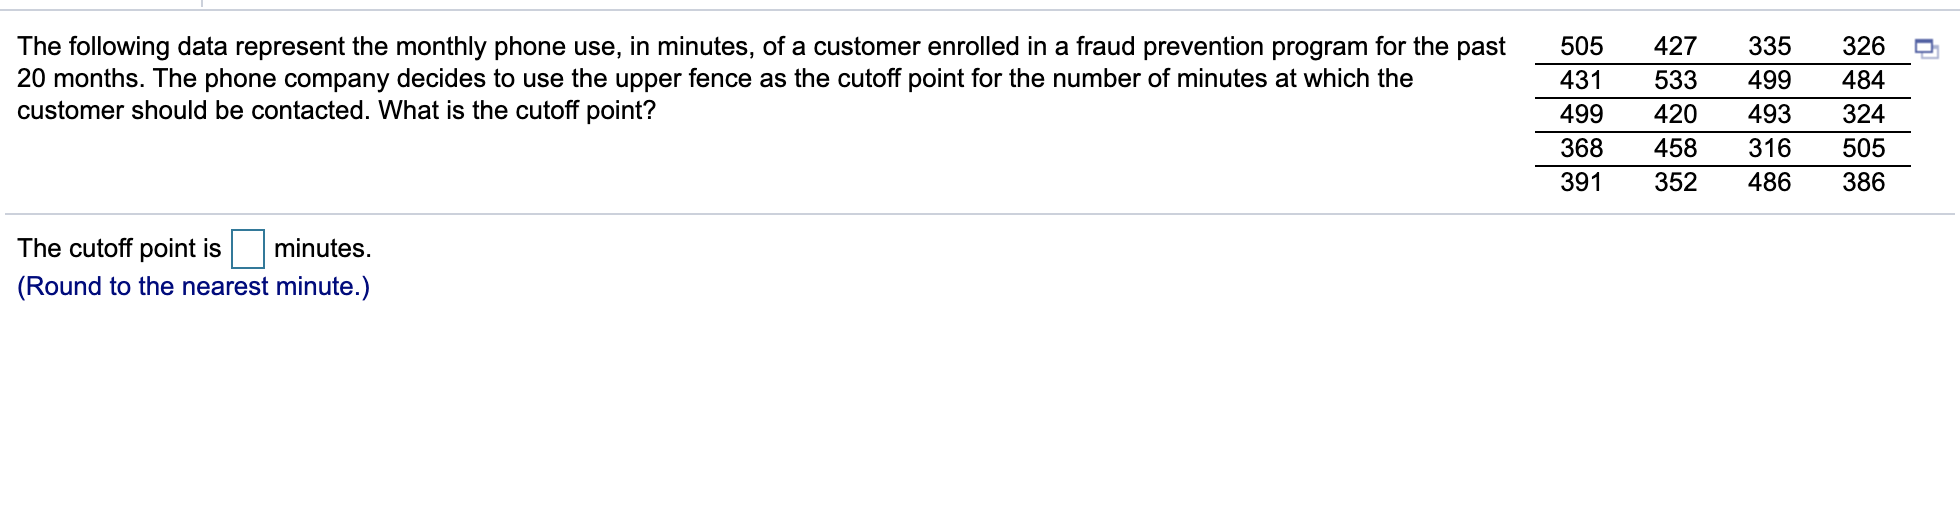 427
The following data represent the monthly phone use, in minutes, of a customer enrolled in a fraud prevention program for the past
20 months. The phone company decides to use the upper fence as the cutoff point for the number of minutes at which the
customer should be contacted. What is the cutoff point?
505
335
326
431
533
499
484
499
420
493
324
368
458
316
505
391
352
486
386
The cutoff point is
minutes.
(Round to the nearest minute.)
